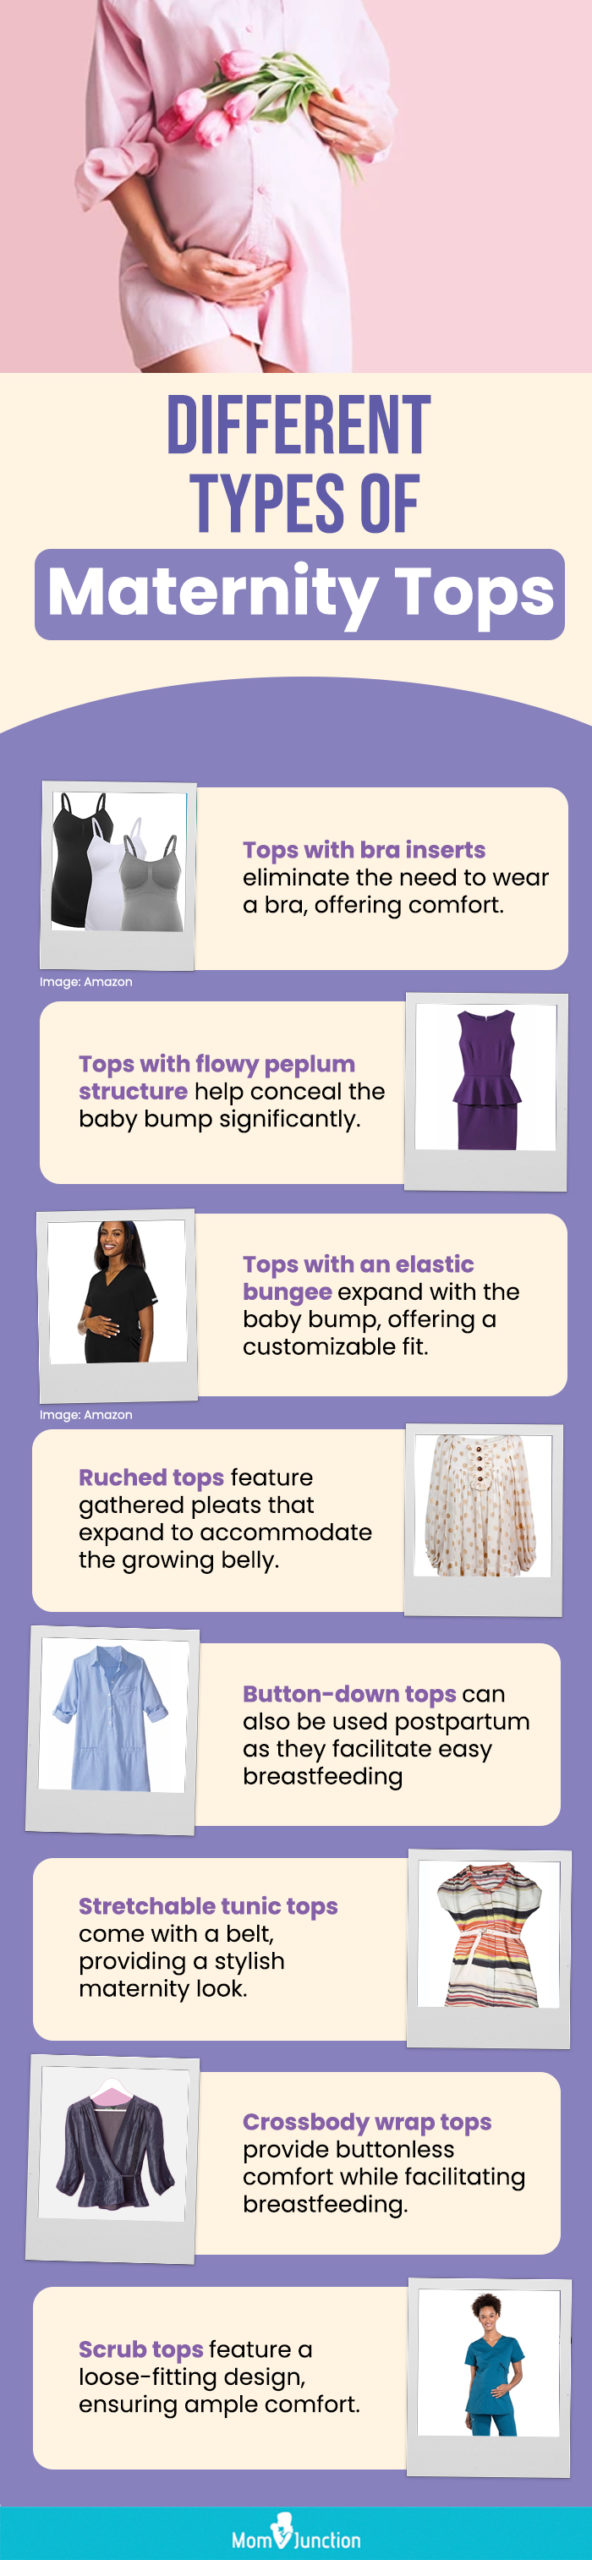 Different Types Of Maternity Tops (infographic)